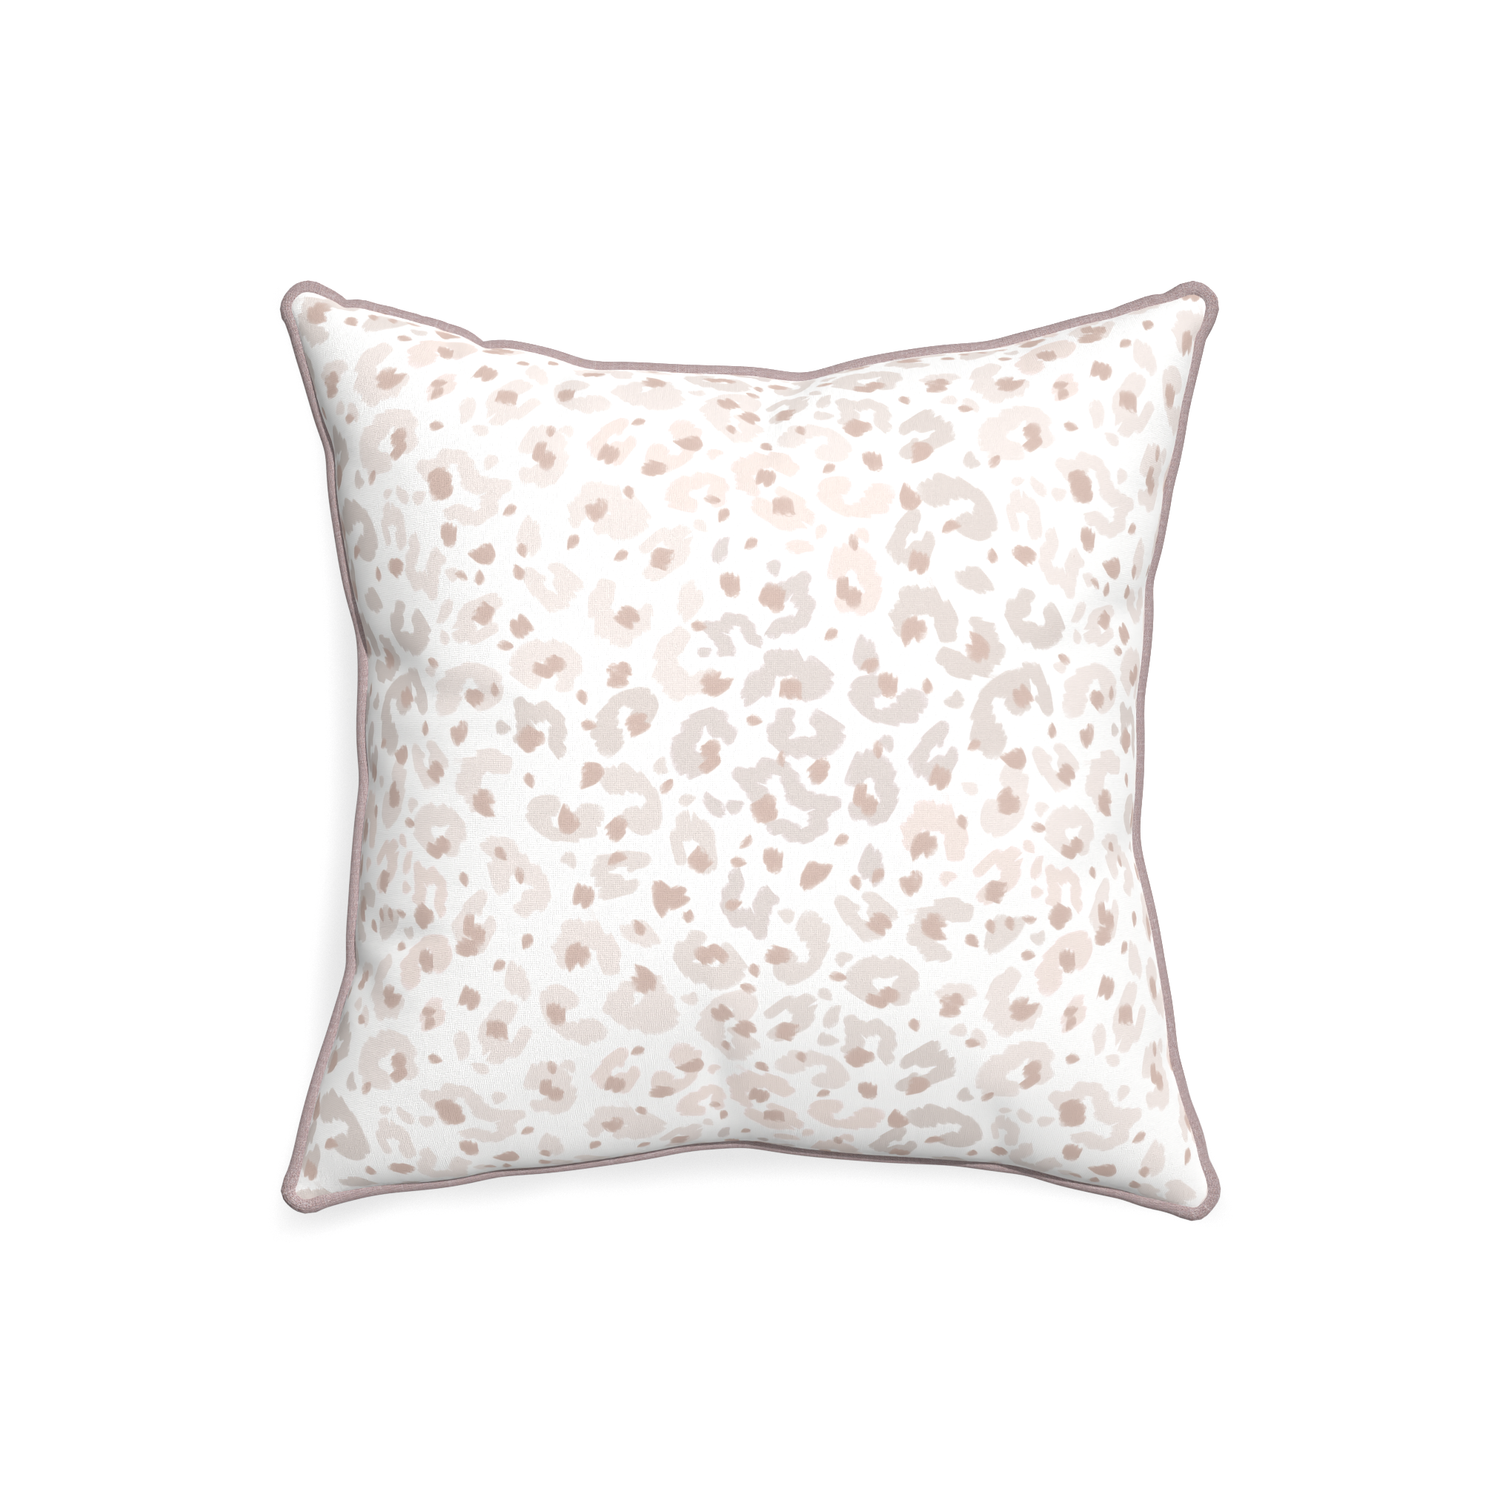 20-square rosie custom beige animal printpillow with orchid piping on white background